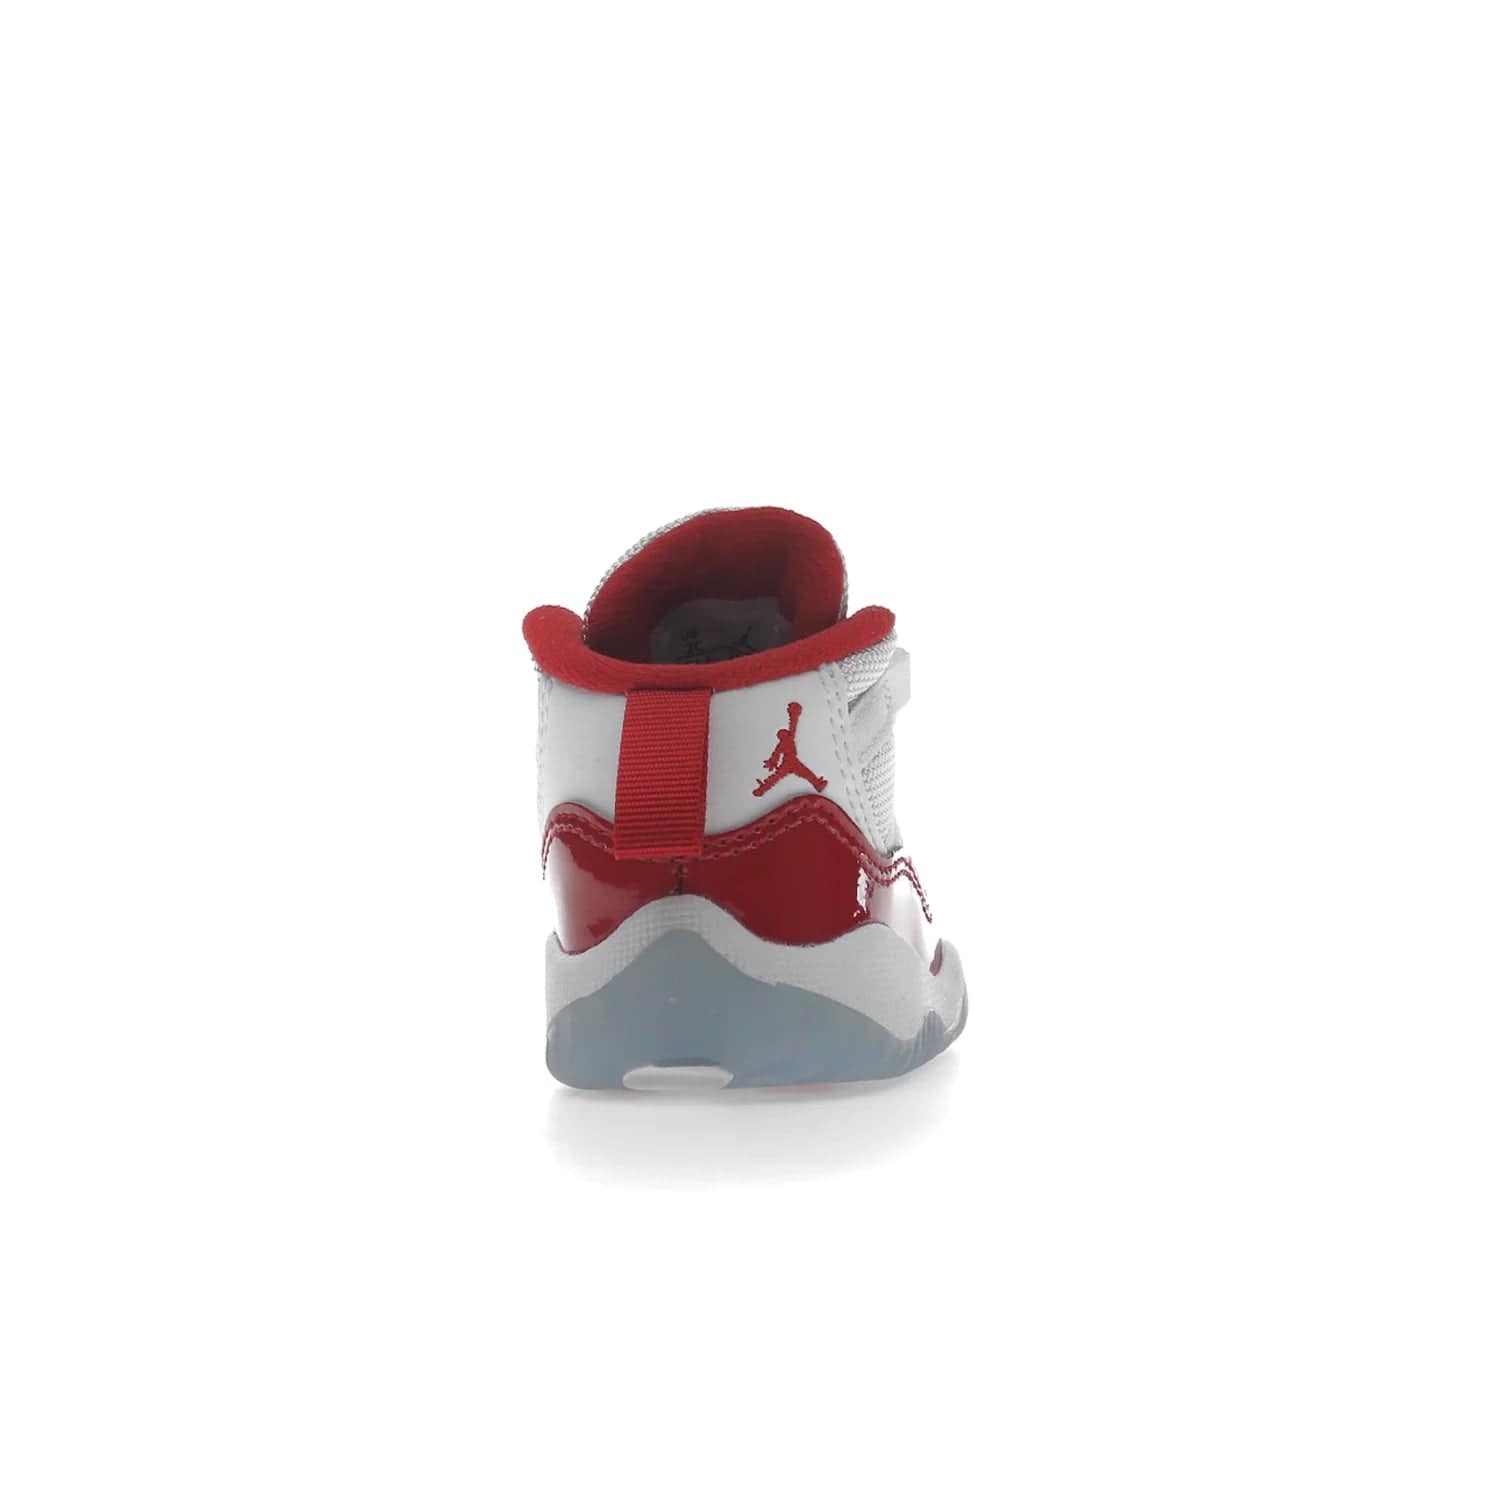 Jordan 11 Retro Cherry (2022) (TD) - Image 29 - Only at www.BallersClubKickz.com - Timeless classic. Air Jordan 11 Retro Cherry 2022 TD combines mesh, leather & suede for a unique look. White upper with varsity red suede. Jumpman logo on collar & tongue. Available Dec 10th, priced at $80.